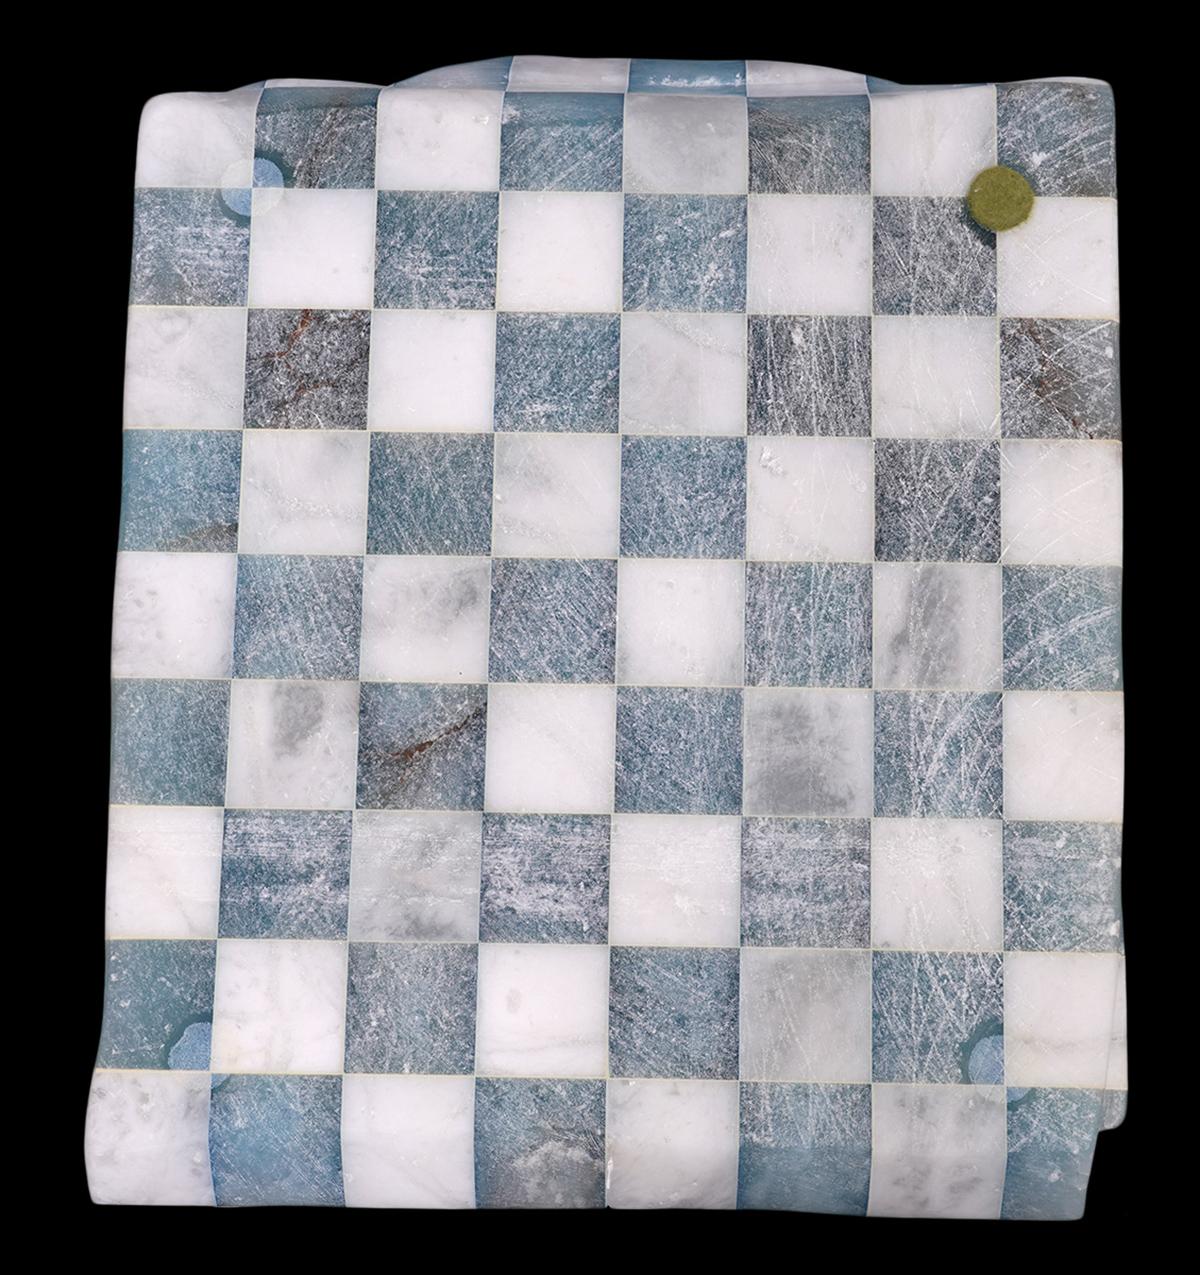 This Italian marble sculpture in the manner of Alasdair Thomson, a Scottish contemporary artist trained in Italy, is sculpted in the shape of a folded checkered men’s shirt. It is remarkable how the rigid marble has been transformed into what looks